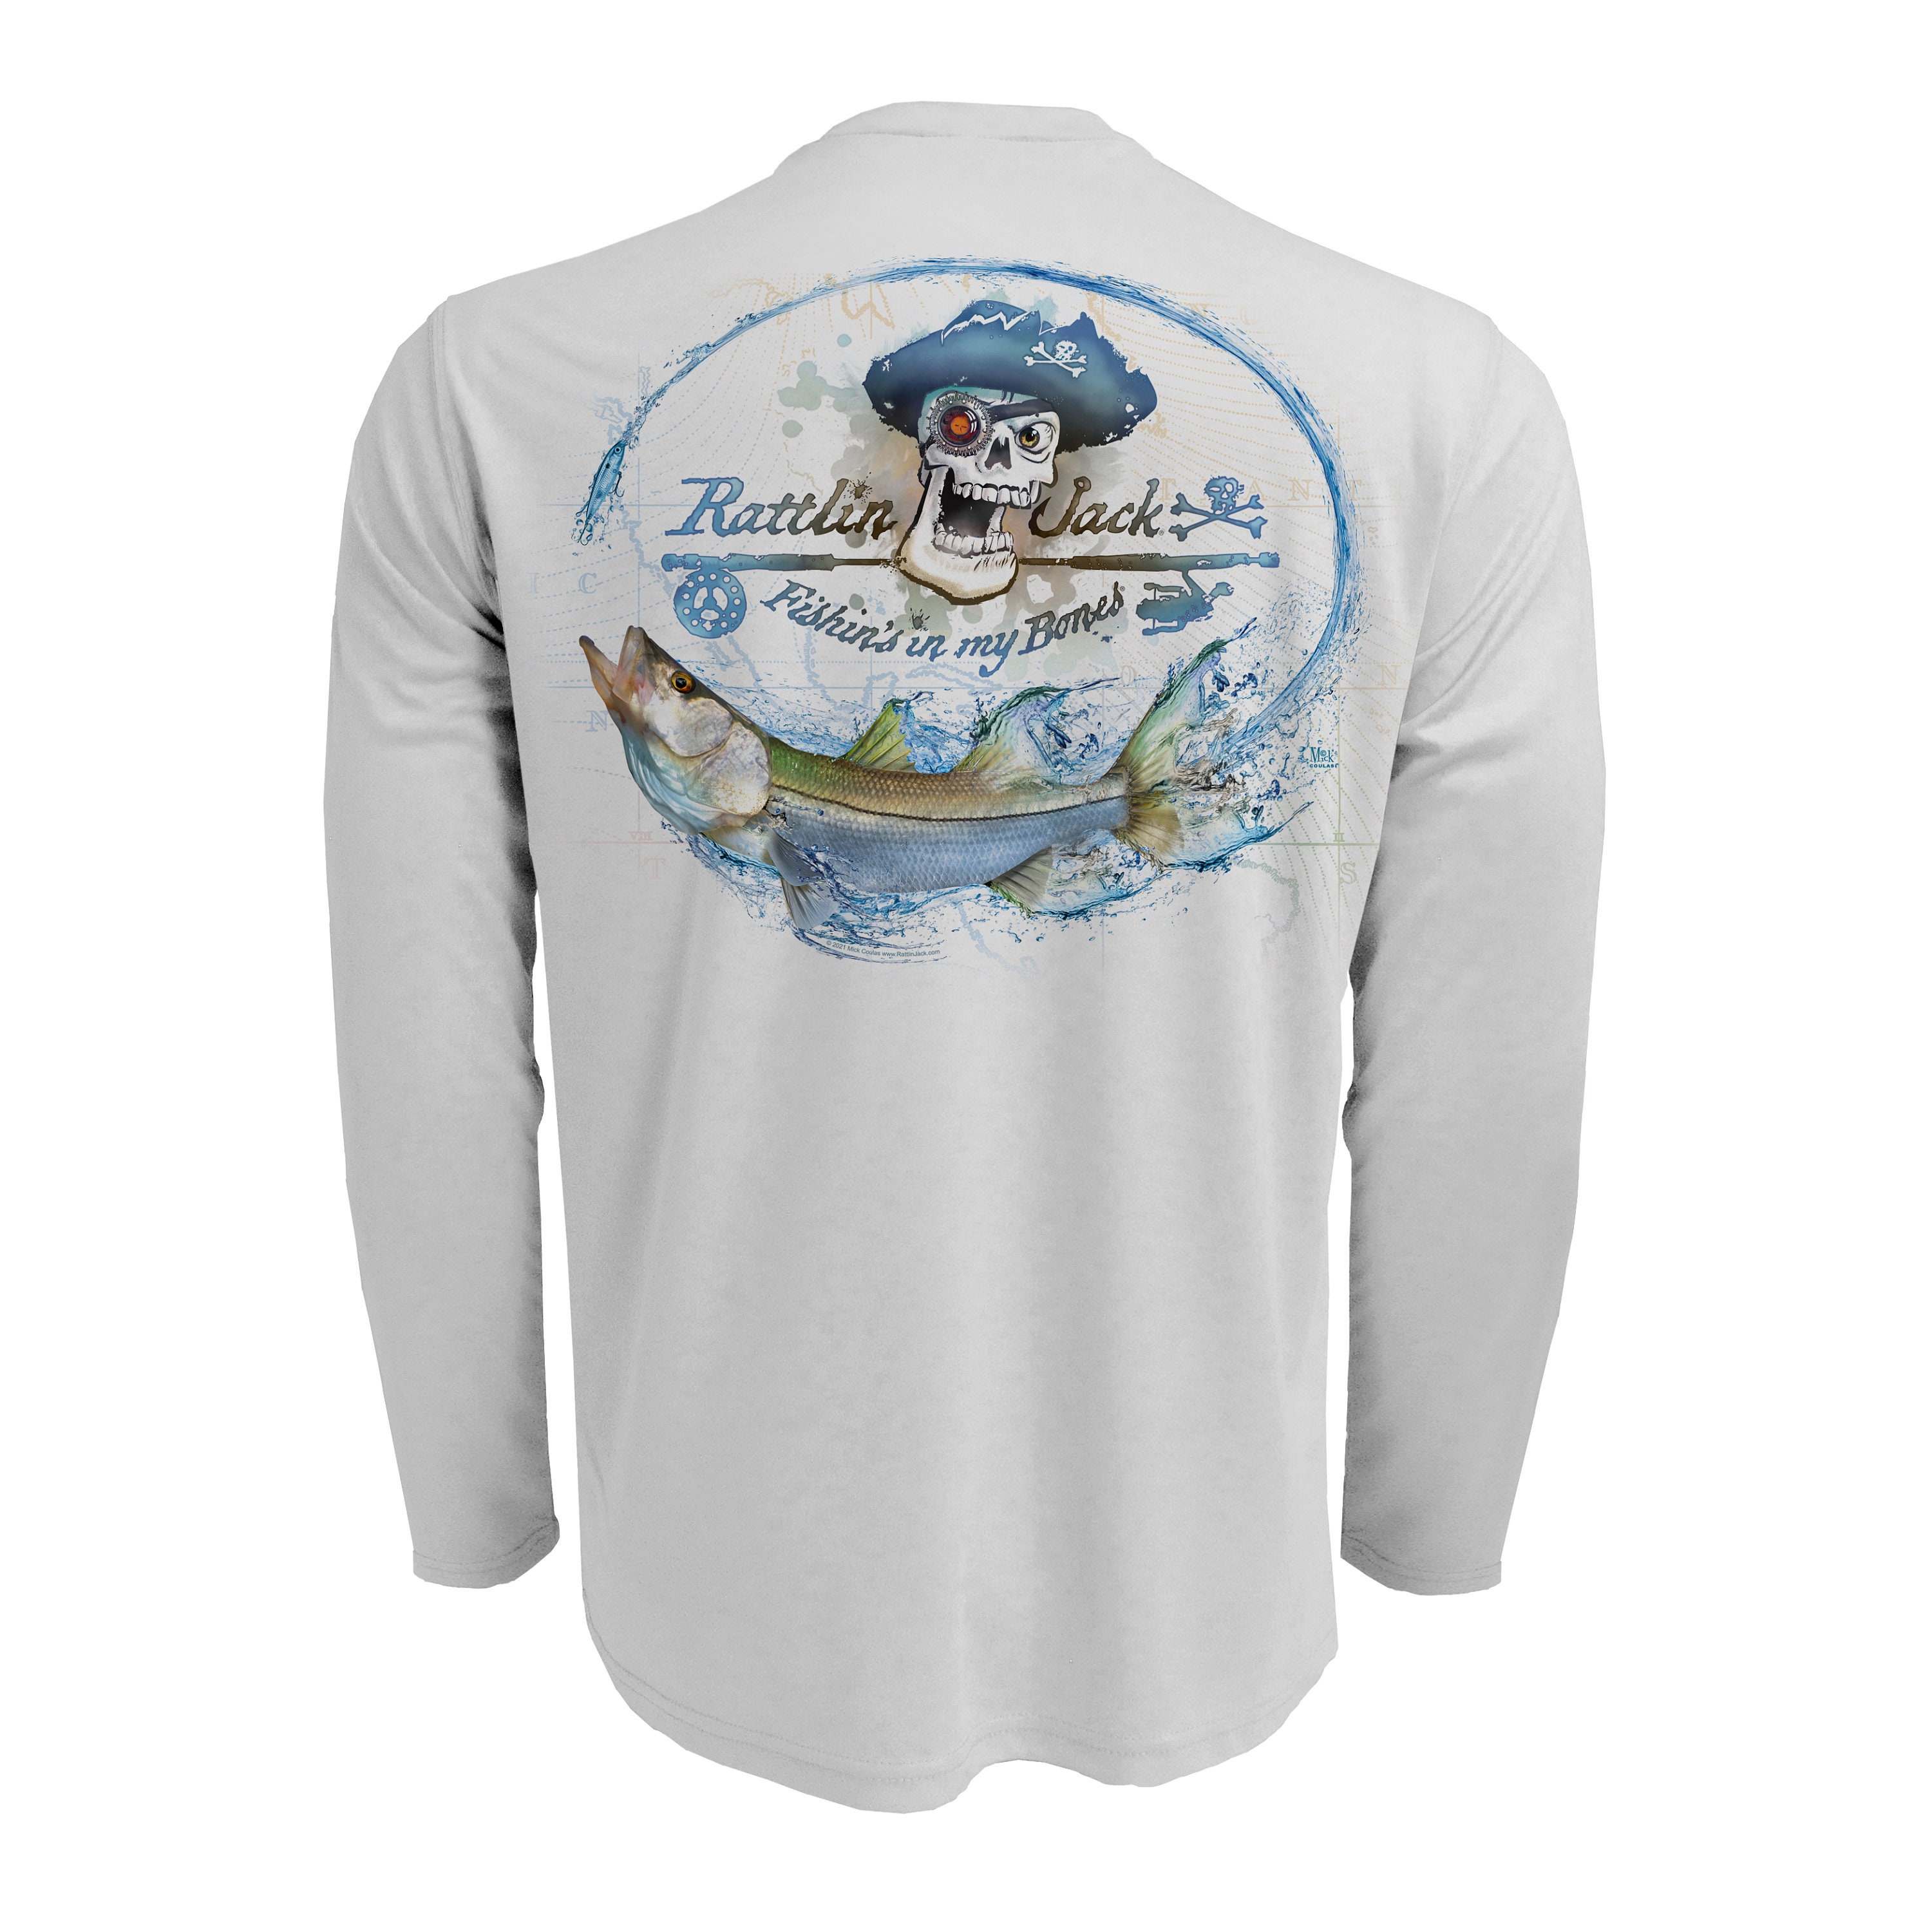 Youth Long Sleeve UV50 – Rig & Water Performance